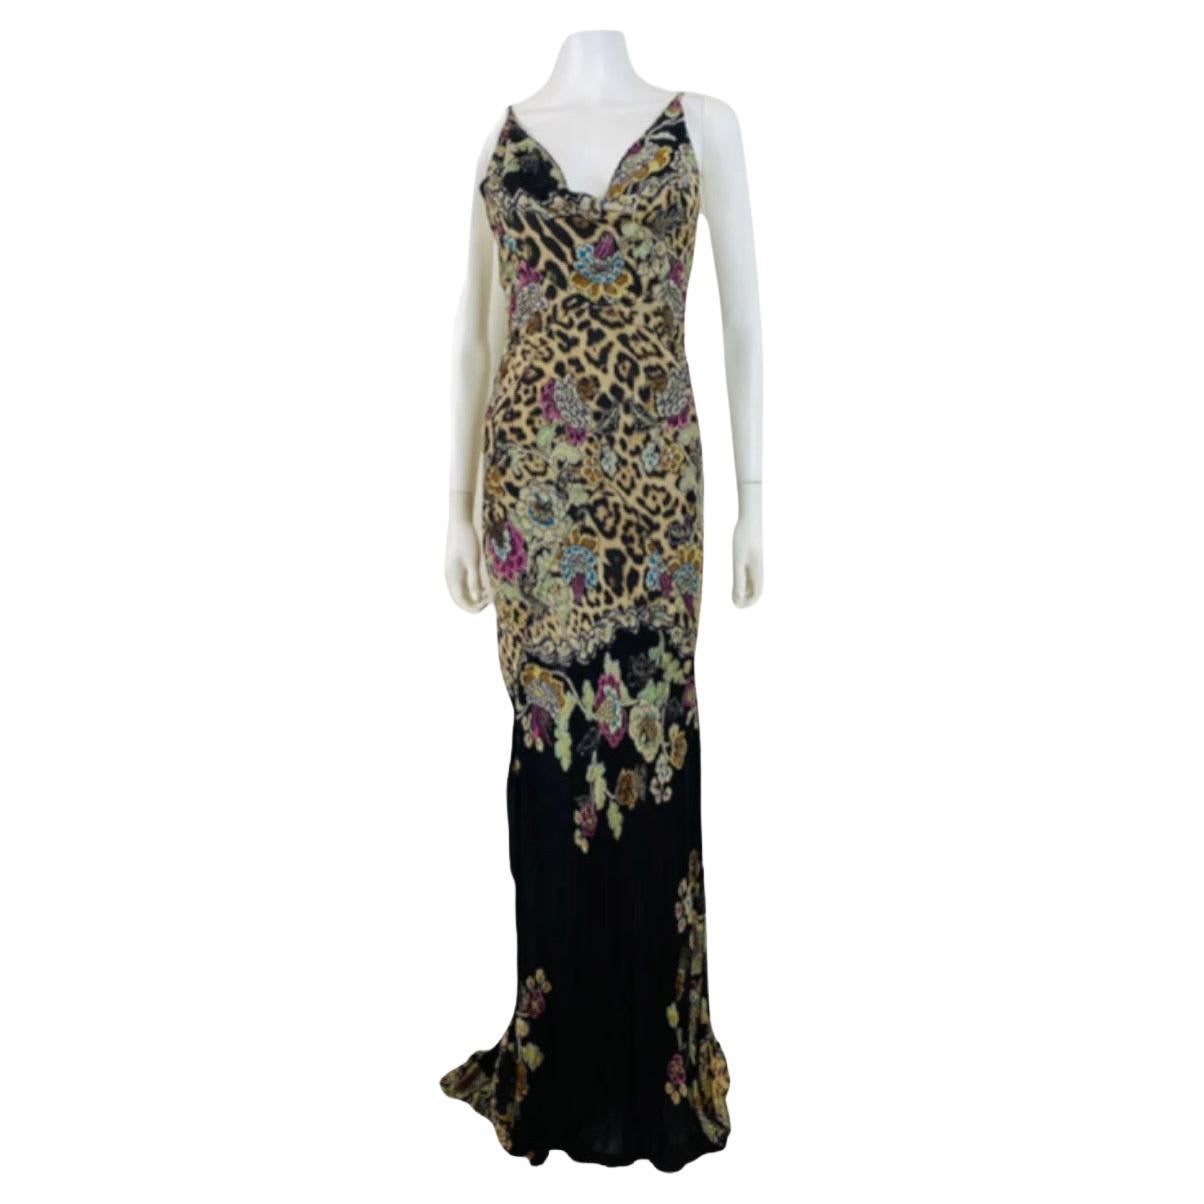 Vintage S/S 2003 Roberto Cavalli Black Chinoiserie Leopard Floral Dress Gown For Sale